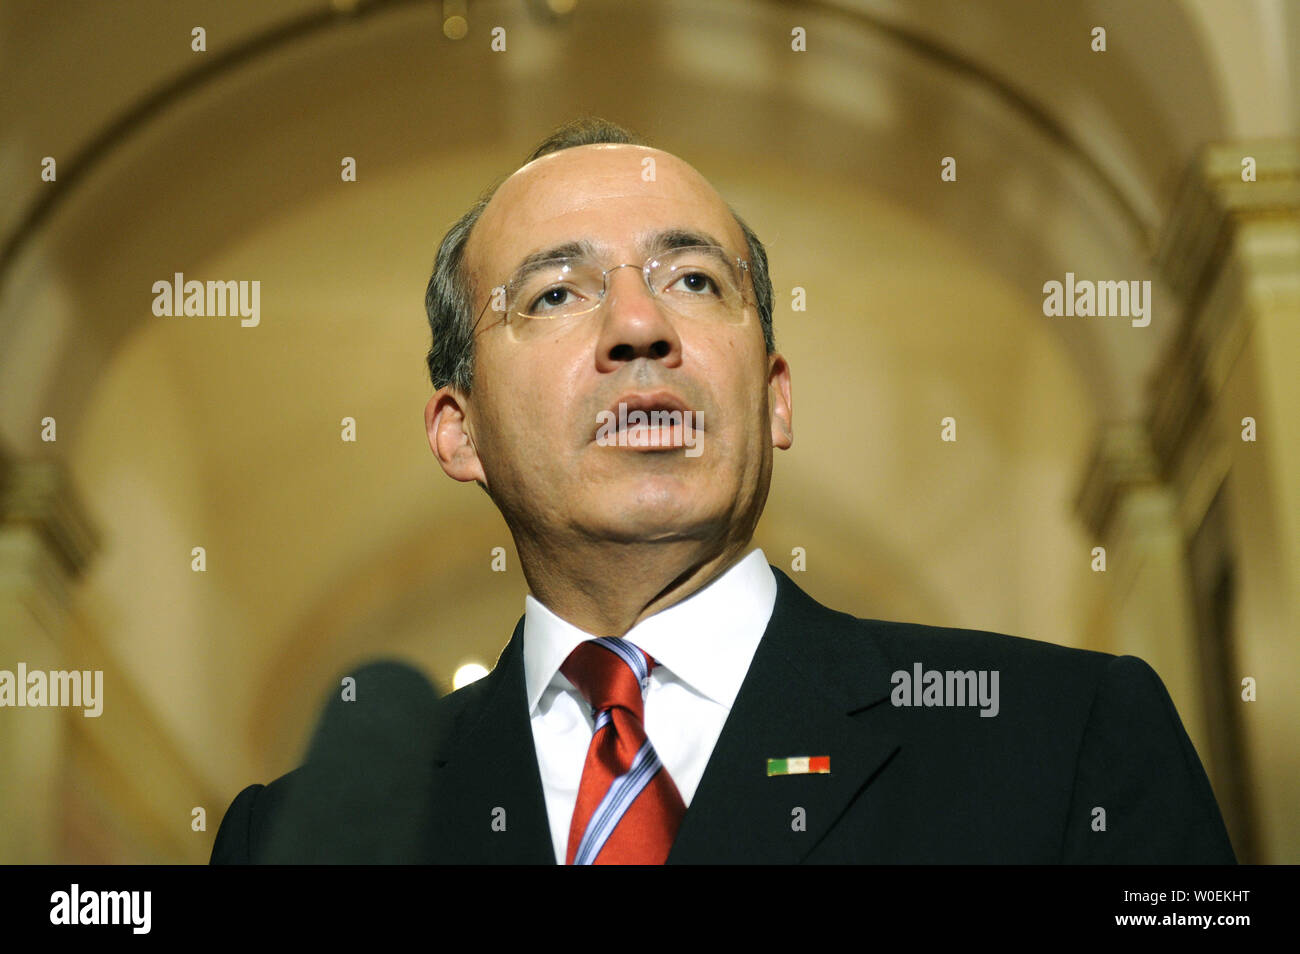 Mexican President Felipe Calderon address members of the media prior to a meeting with Speaker of the House Nancy Pelosi on Capitol Hill in Washington on January 12, 2008. (UPI Photo/Kevin Dietsch) Stock Photo